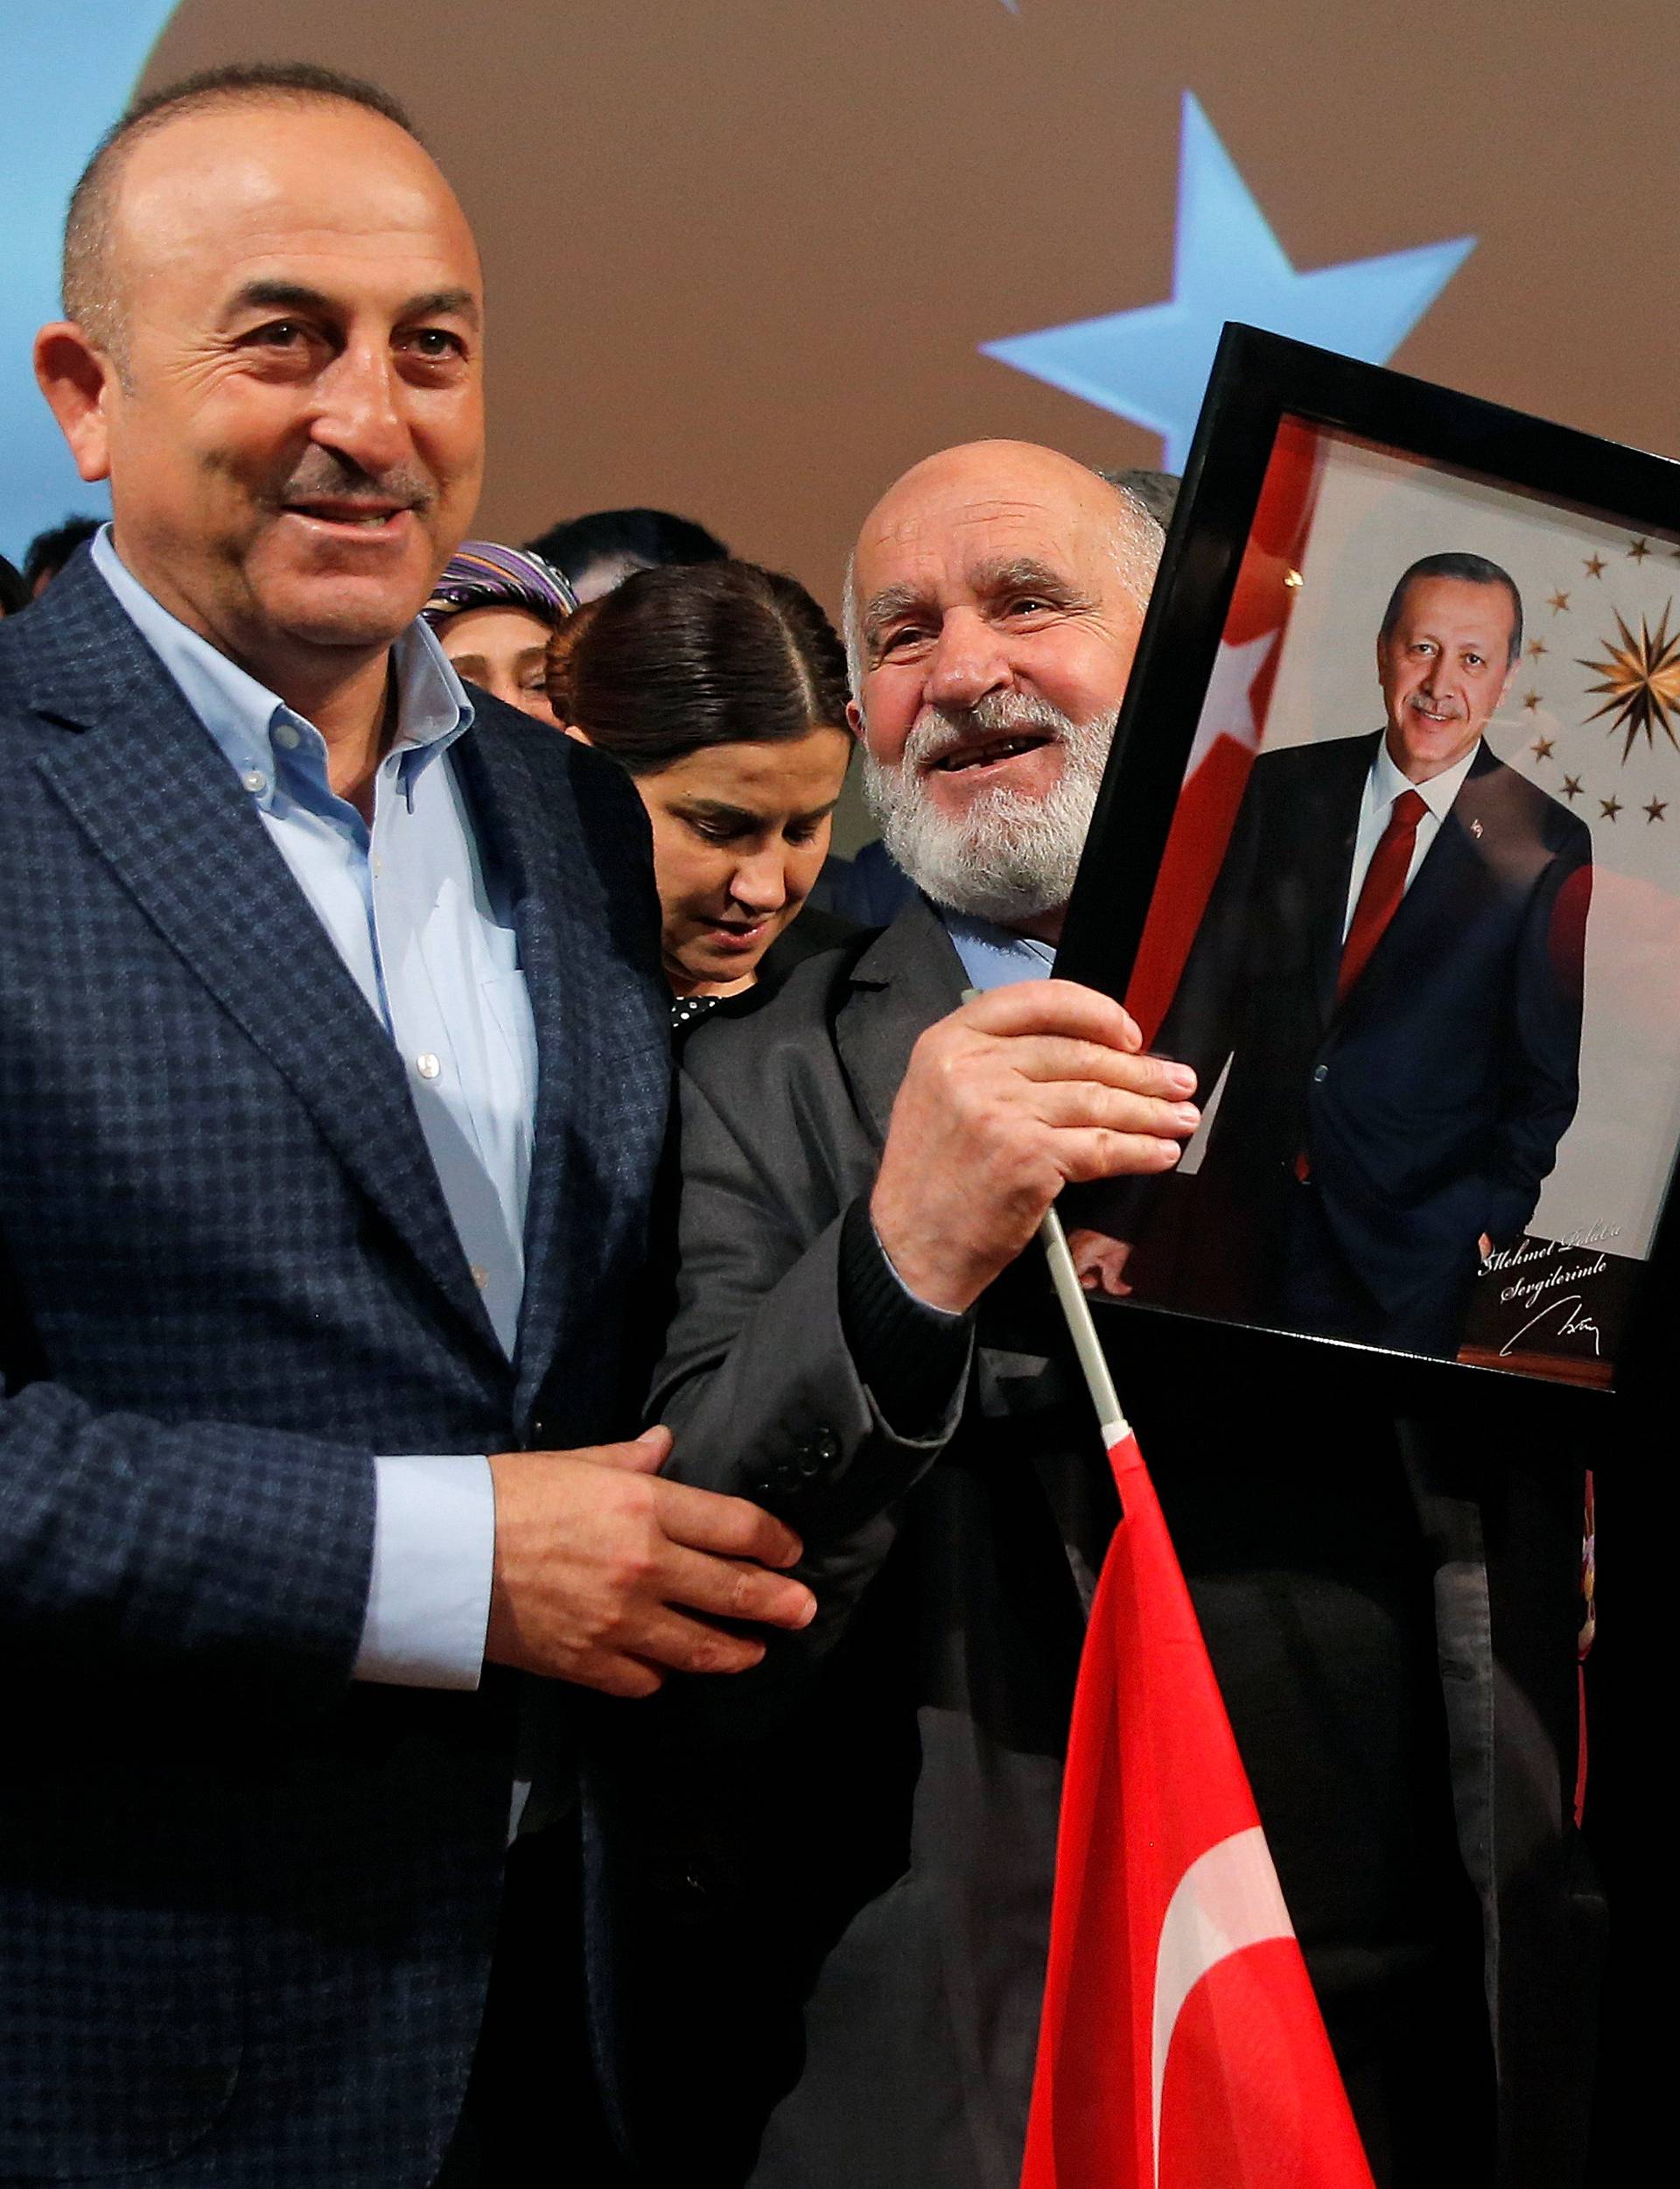 Turkish Foreign Minister Cavusoglu poses with a supporter holding portraits of Turkish President Erdogan and Prime Minister Yildirim at the end of a political rally on Turkey's upcoming referendum, in Metz